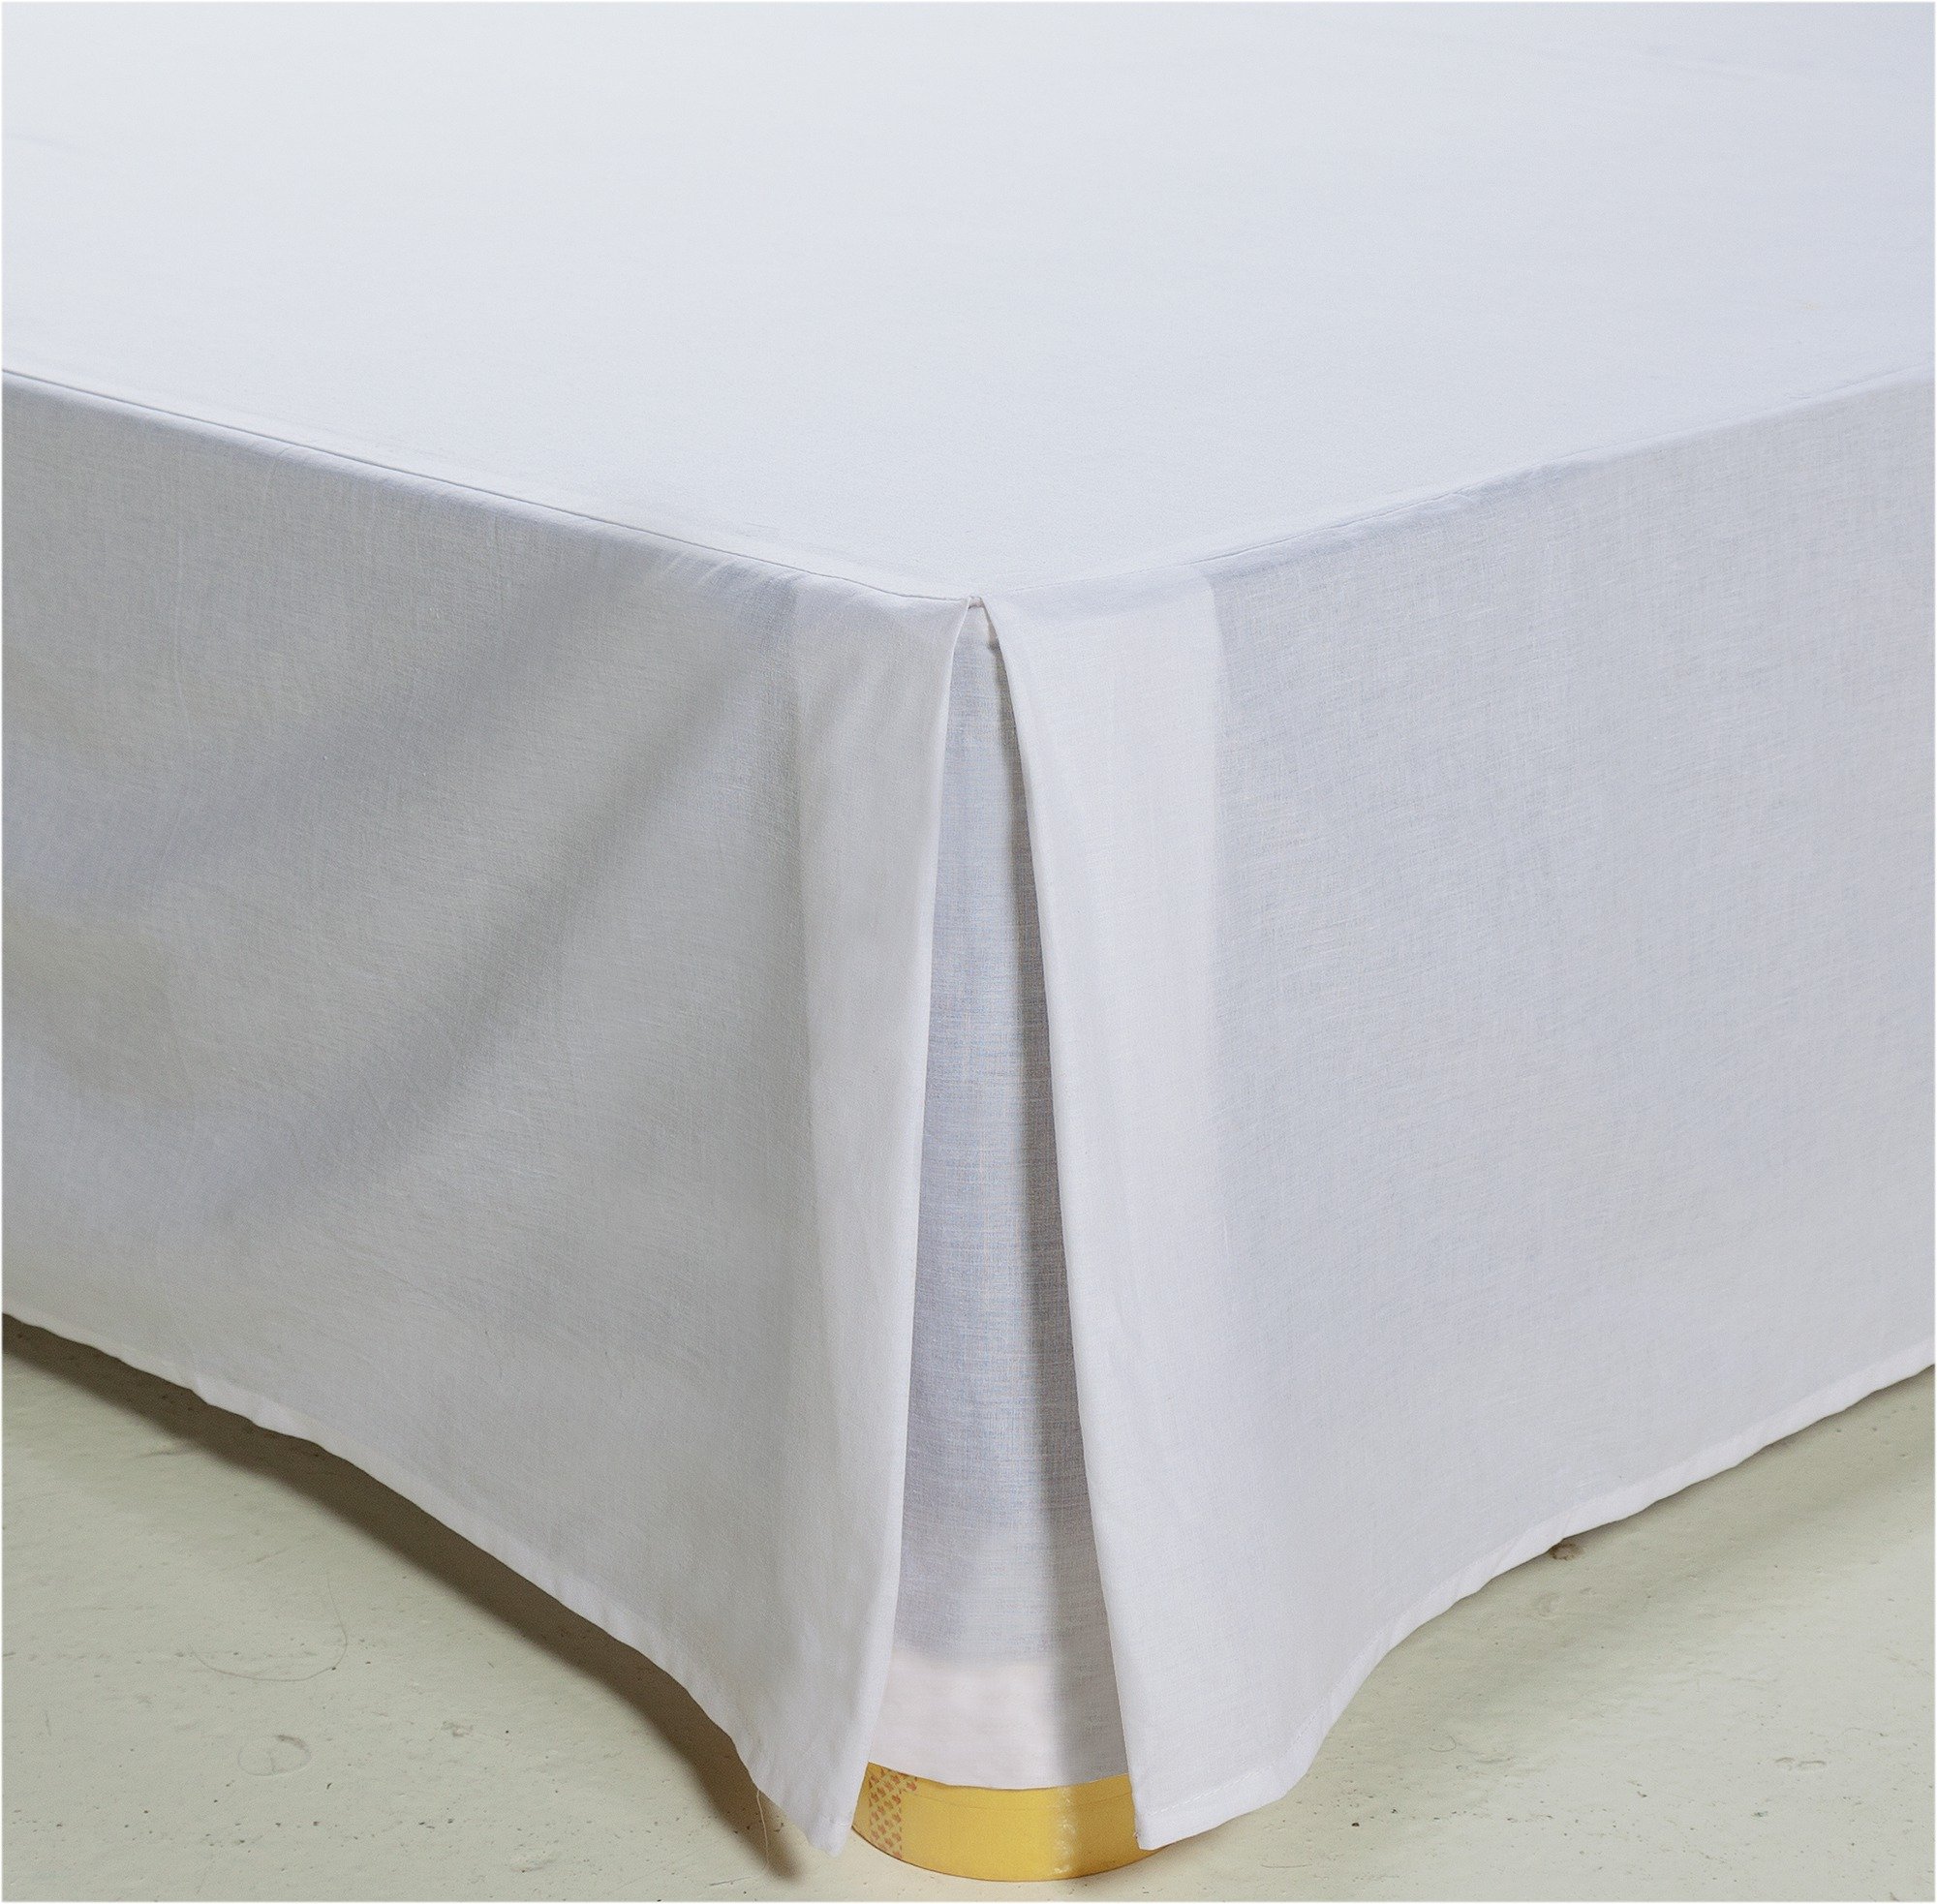 ColourMatch by Argos Super White Valance review